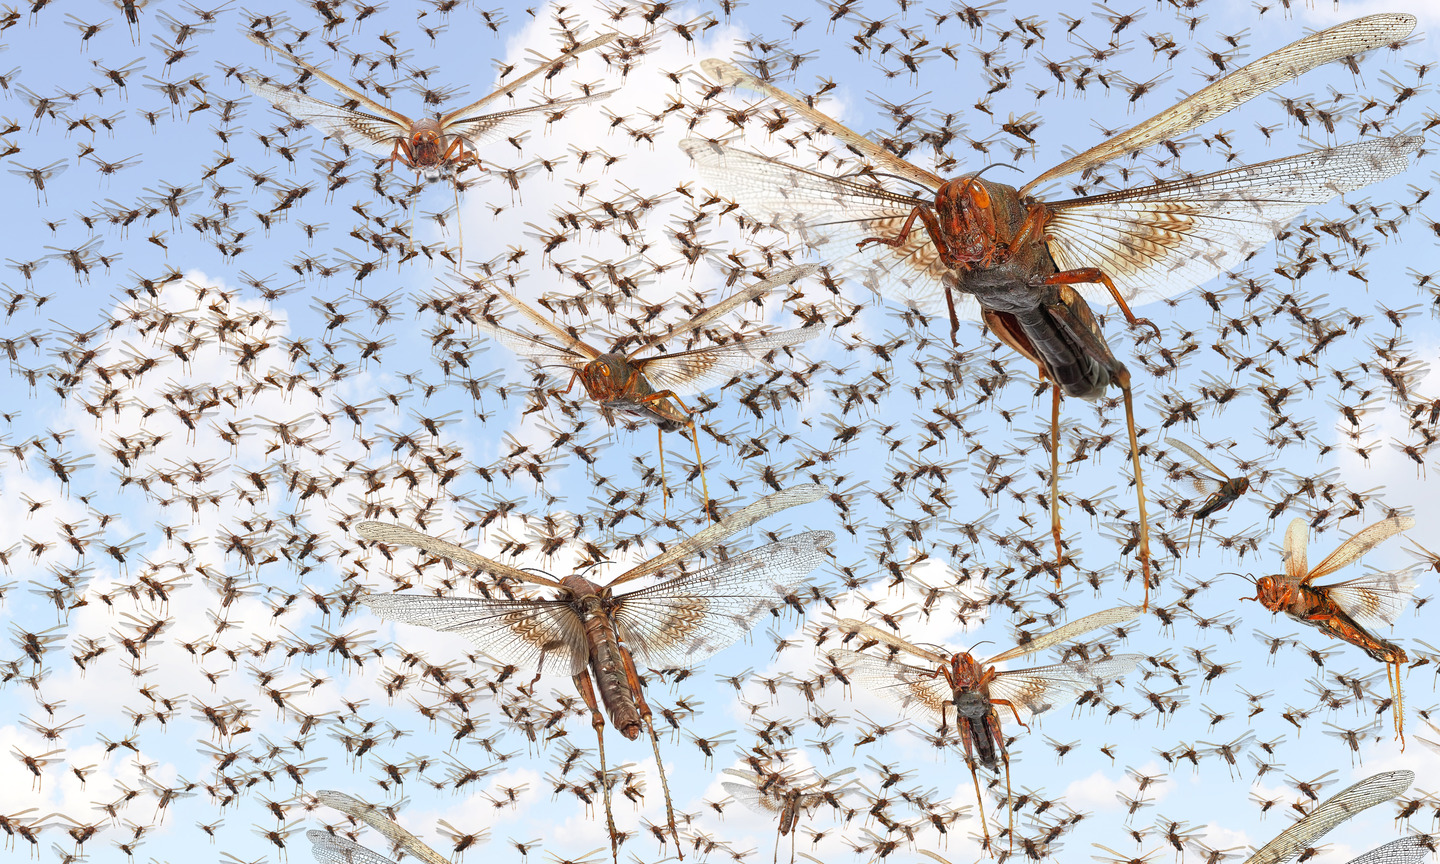 The 2023 Imperva Bad Bot Report shows the internet of the future - like a swarm of locusts.